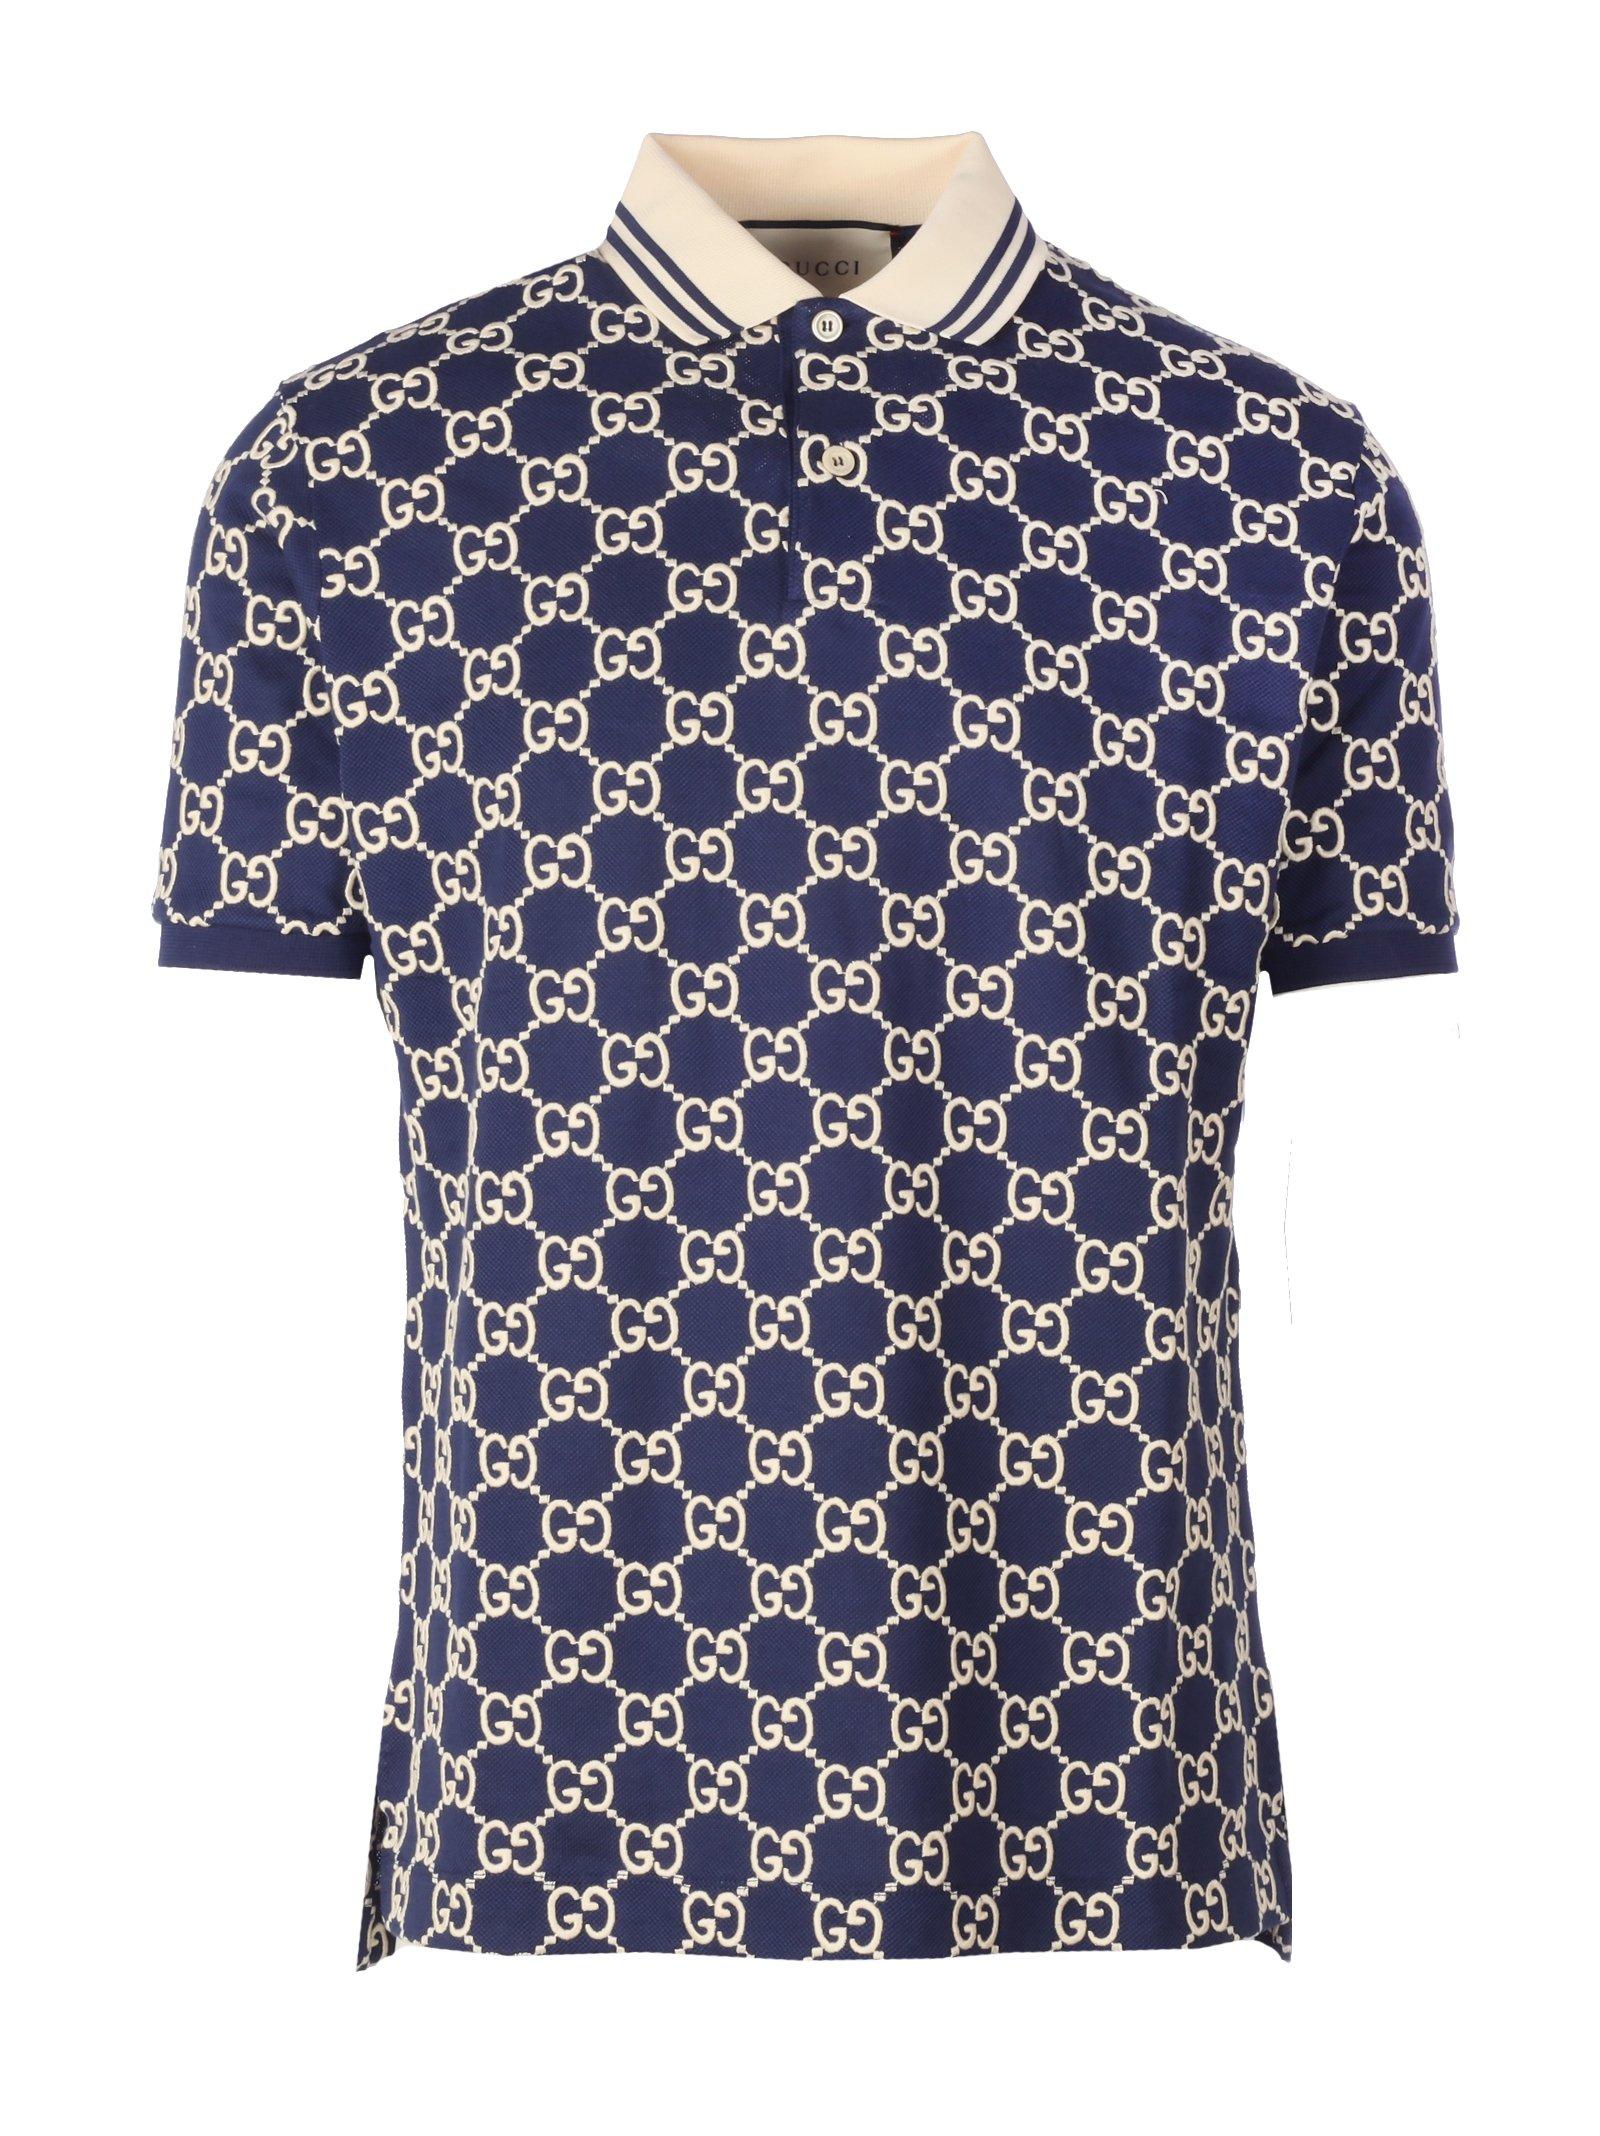 Gucci Cotton GG Supreme Polo Shirt in Blue for Men - Save 10% - Lyst